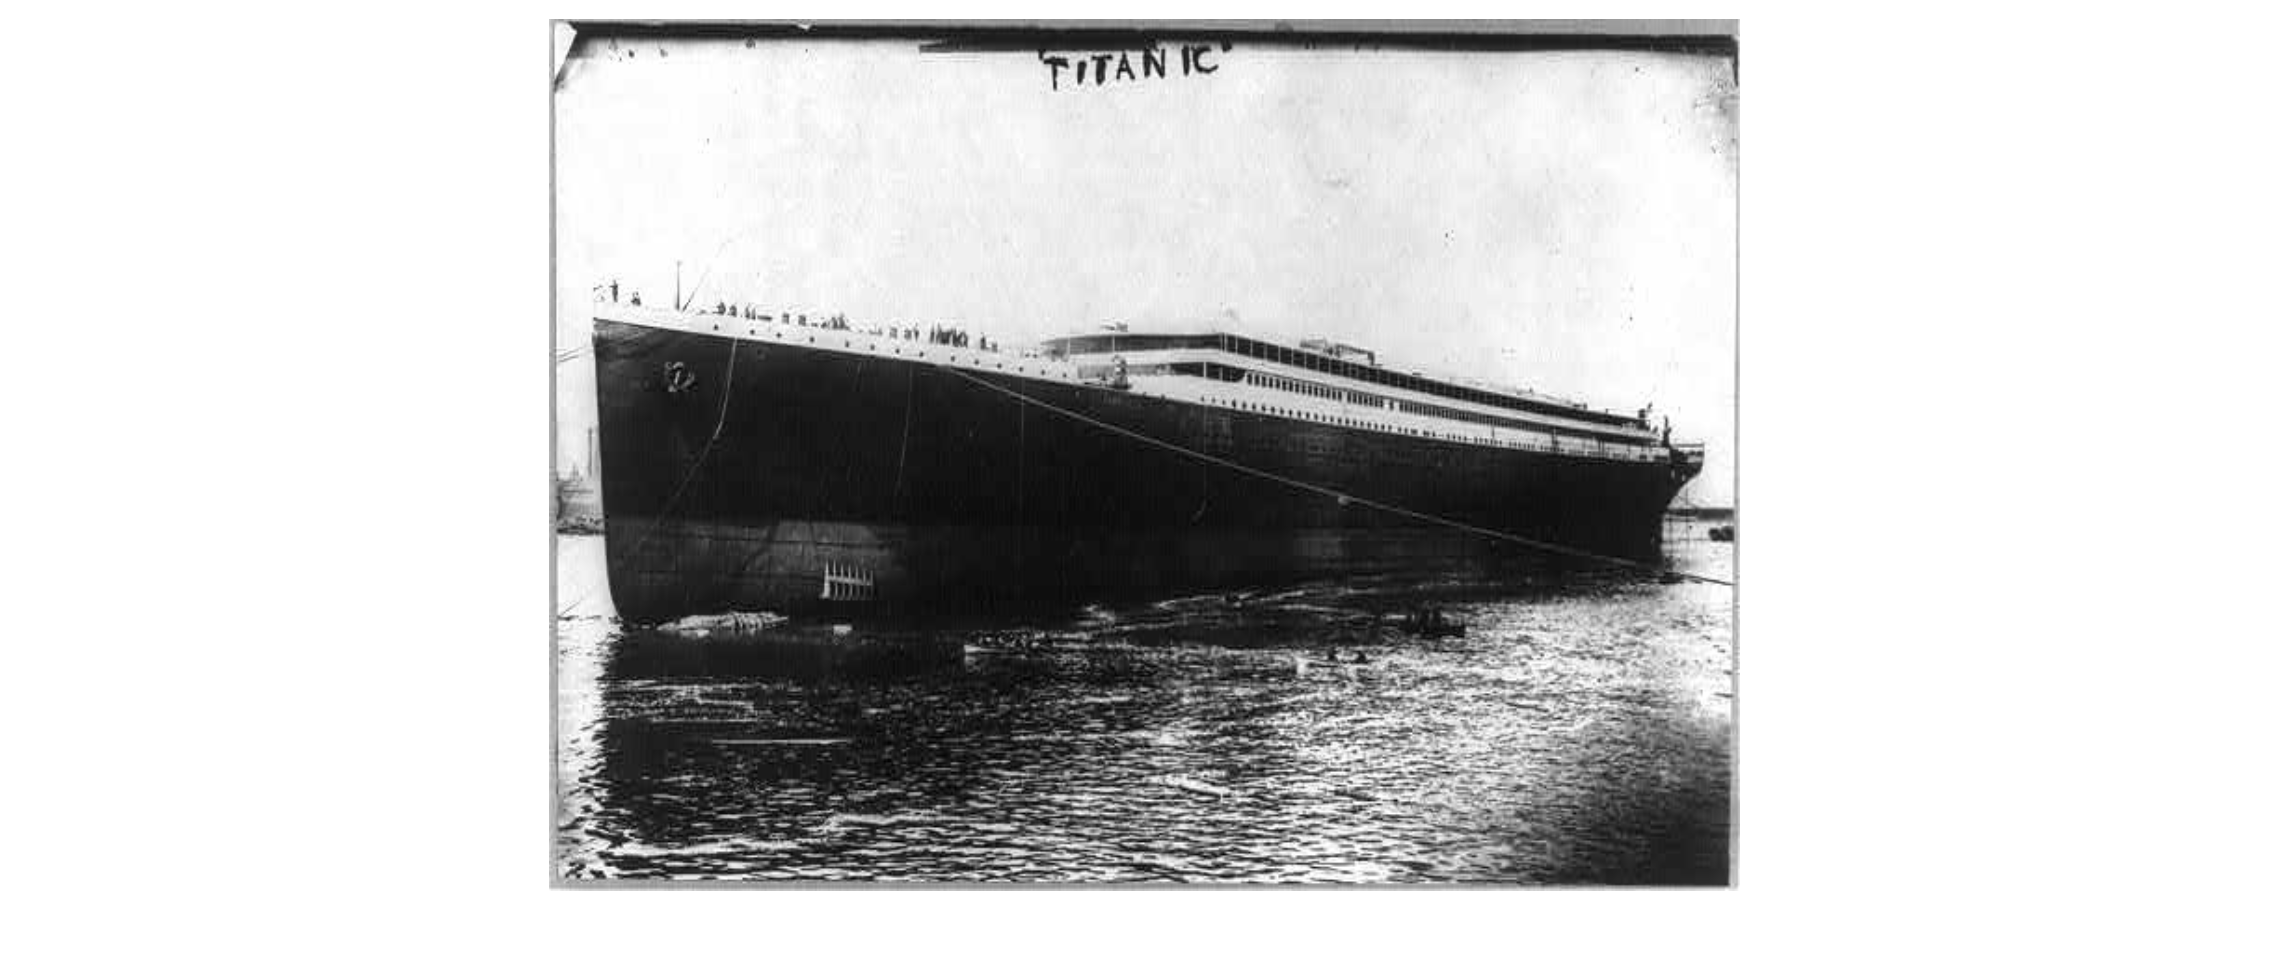 Iceberg Straight Ahead: Multi-Disciplined Research and the Titanic